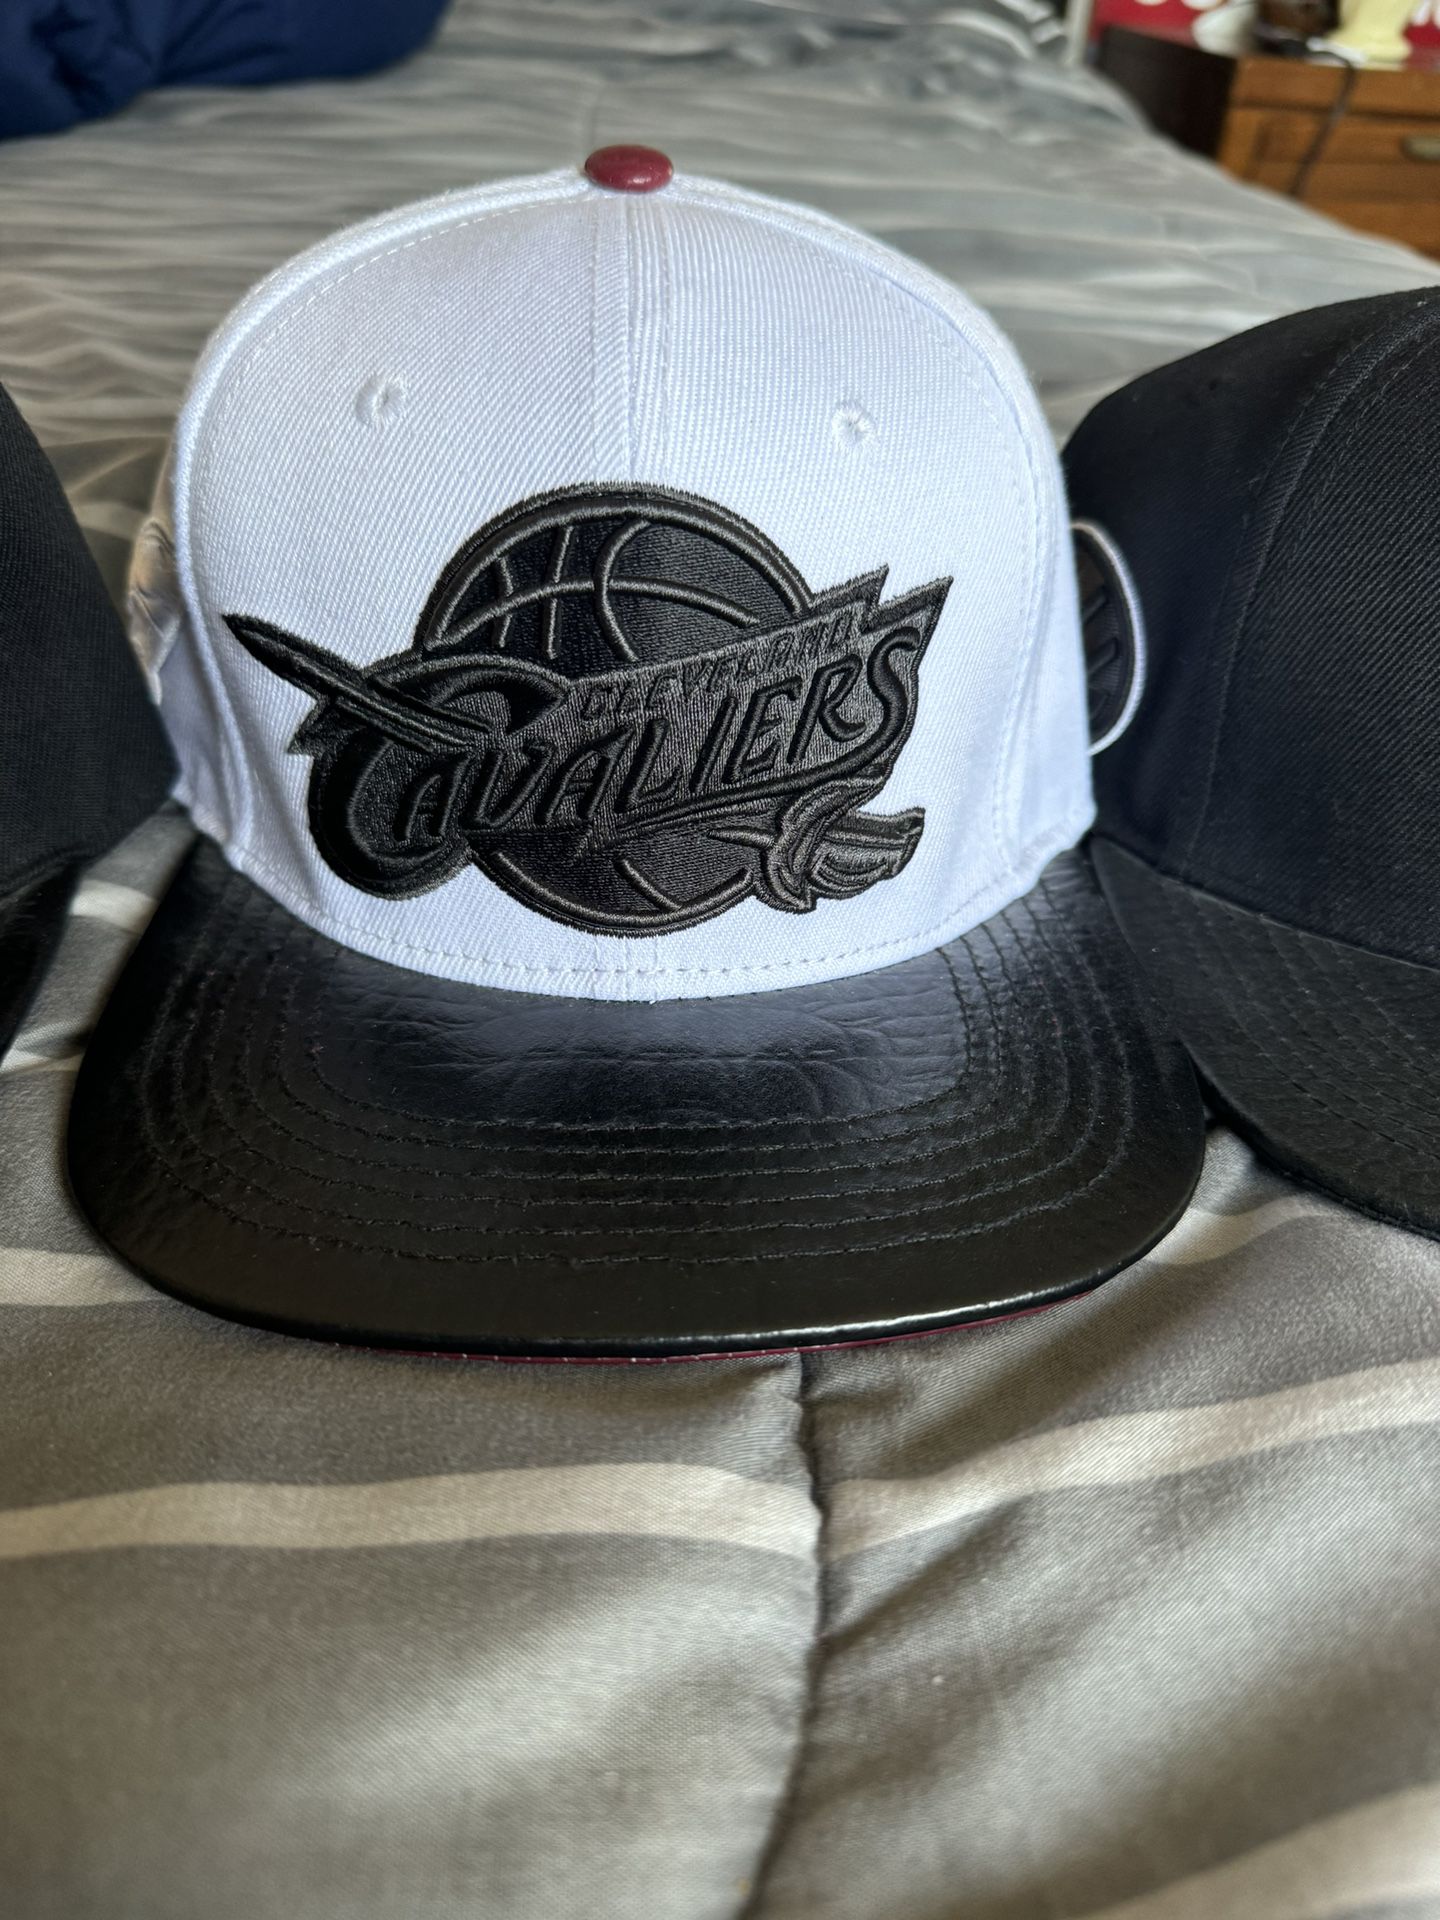 Cleveland Cavs And Knicks Hats 